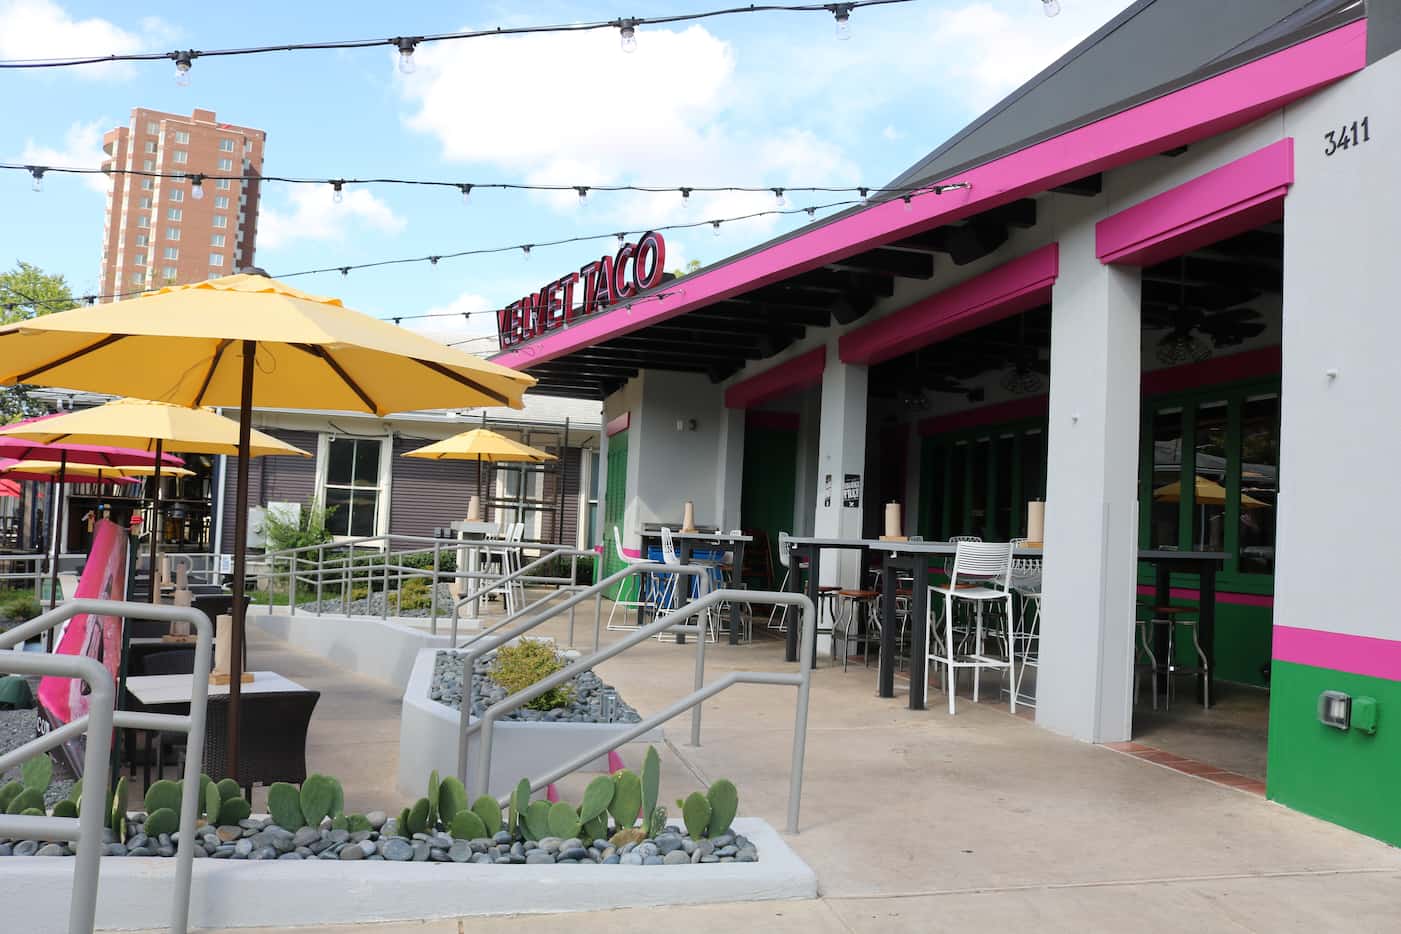 Velvet Taco has opened on McKinney Avenue in Uptown Dallas, in place of the former Urban Taco.